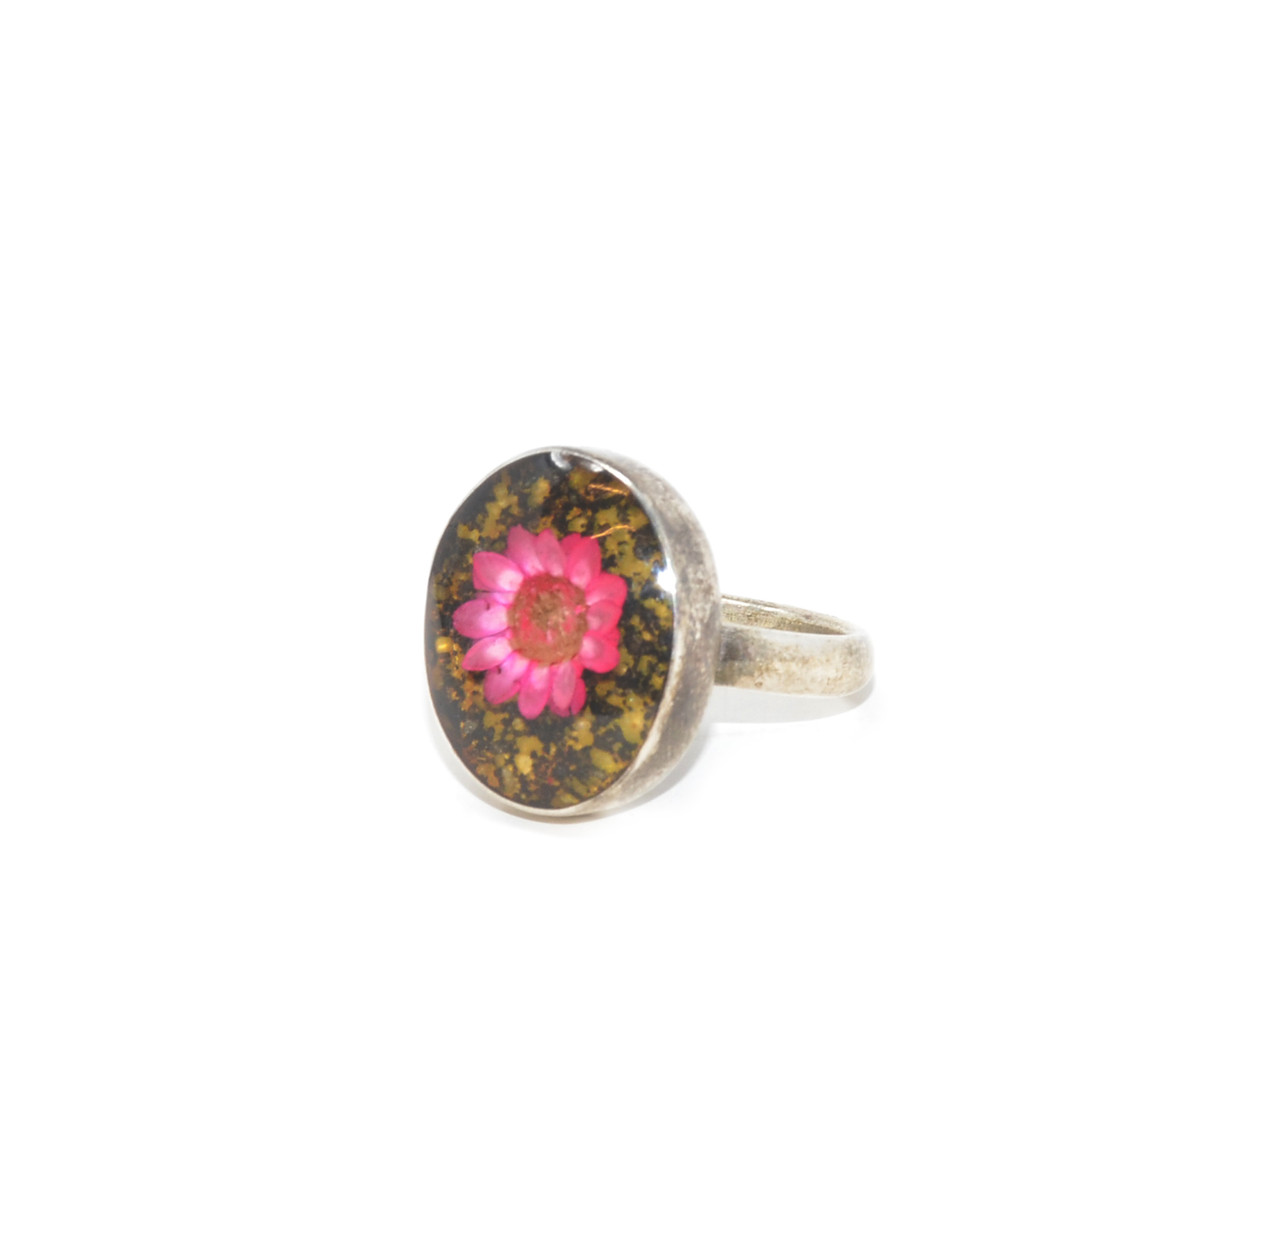 Black and Pink Pressed Flower Resin Ring-Size 7